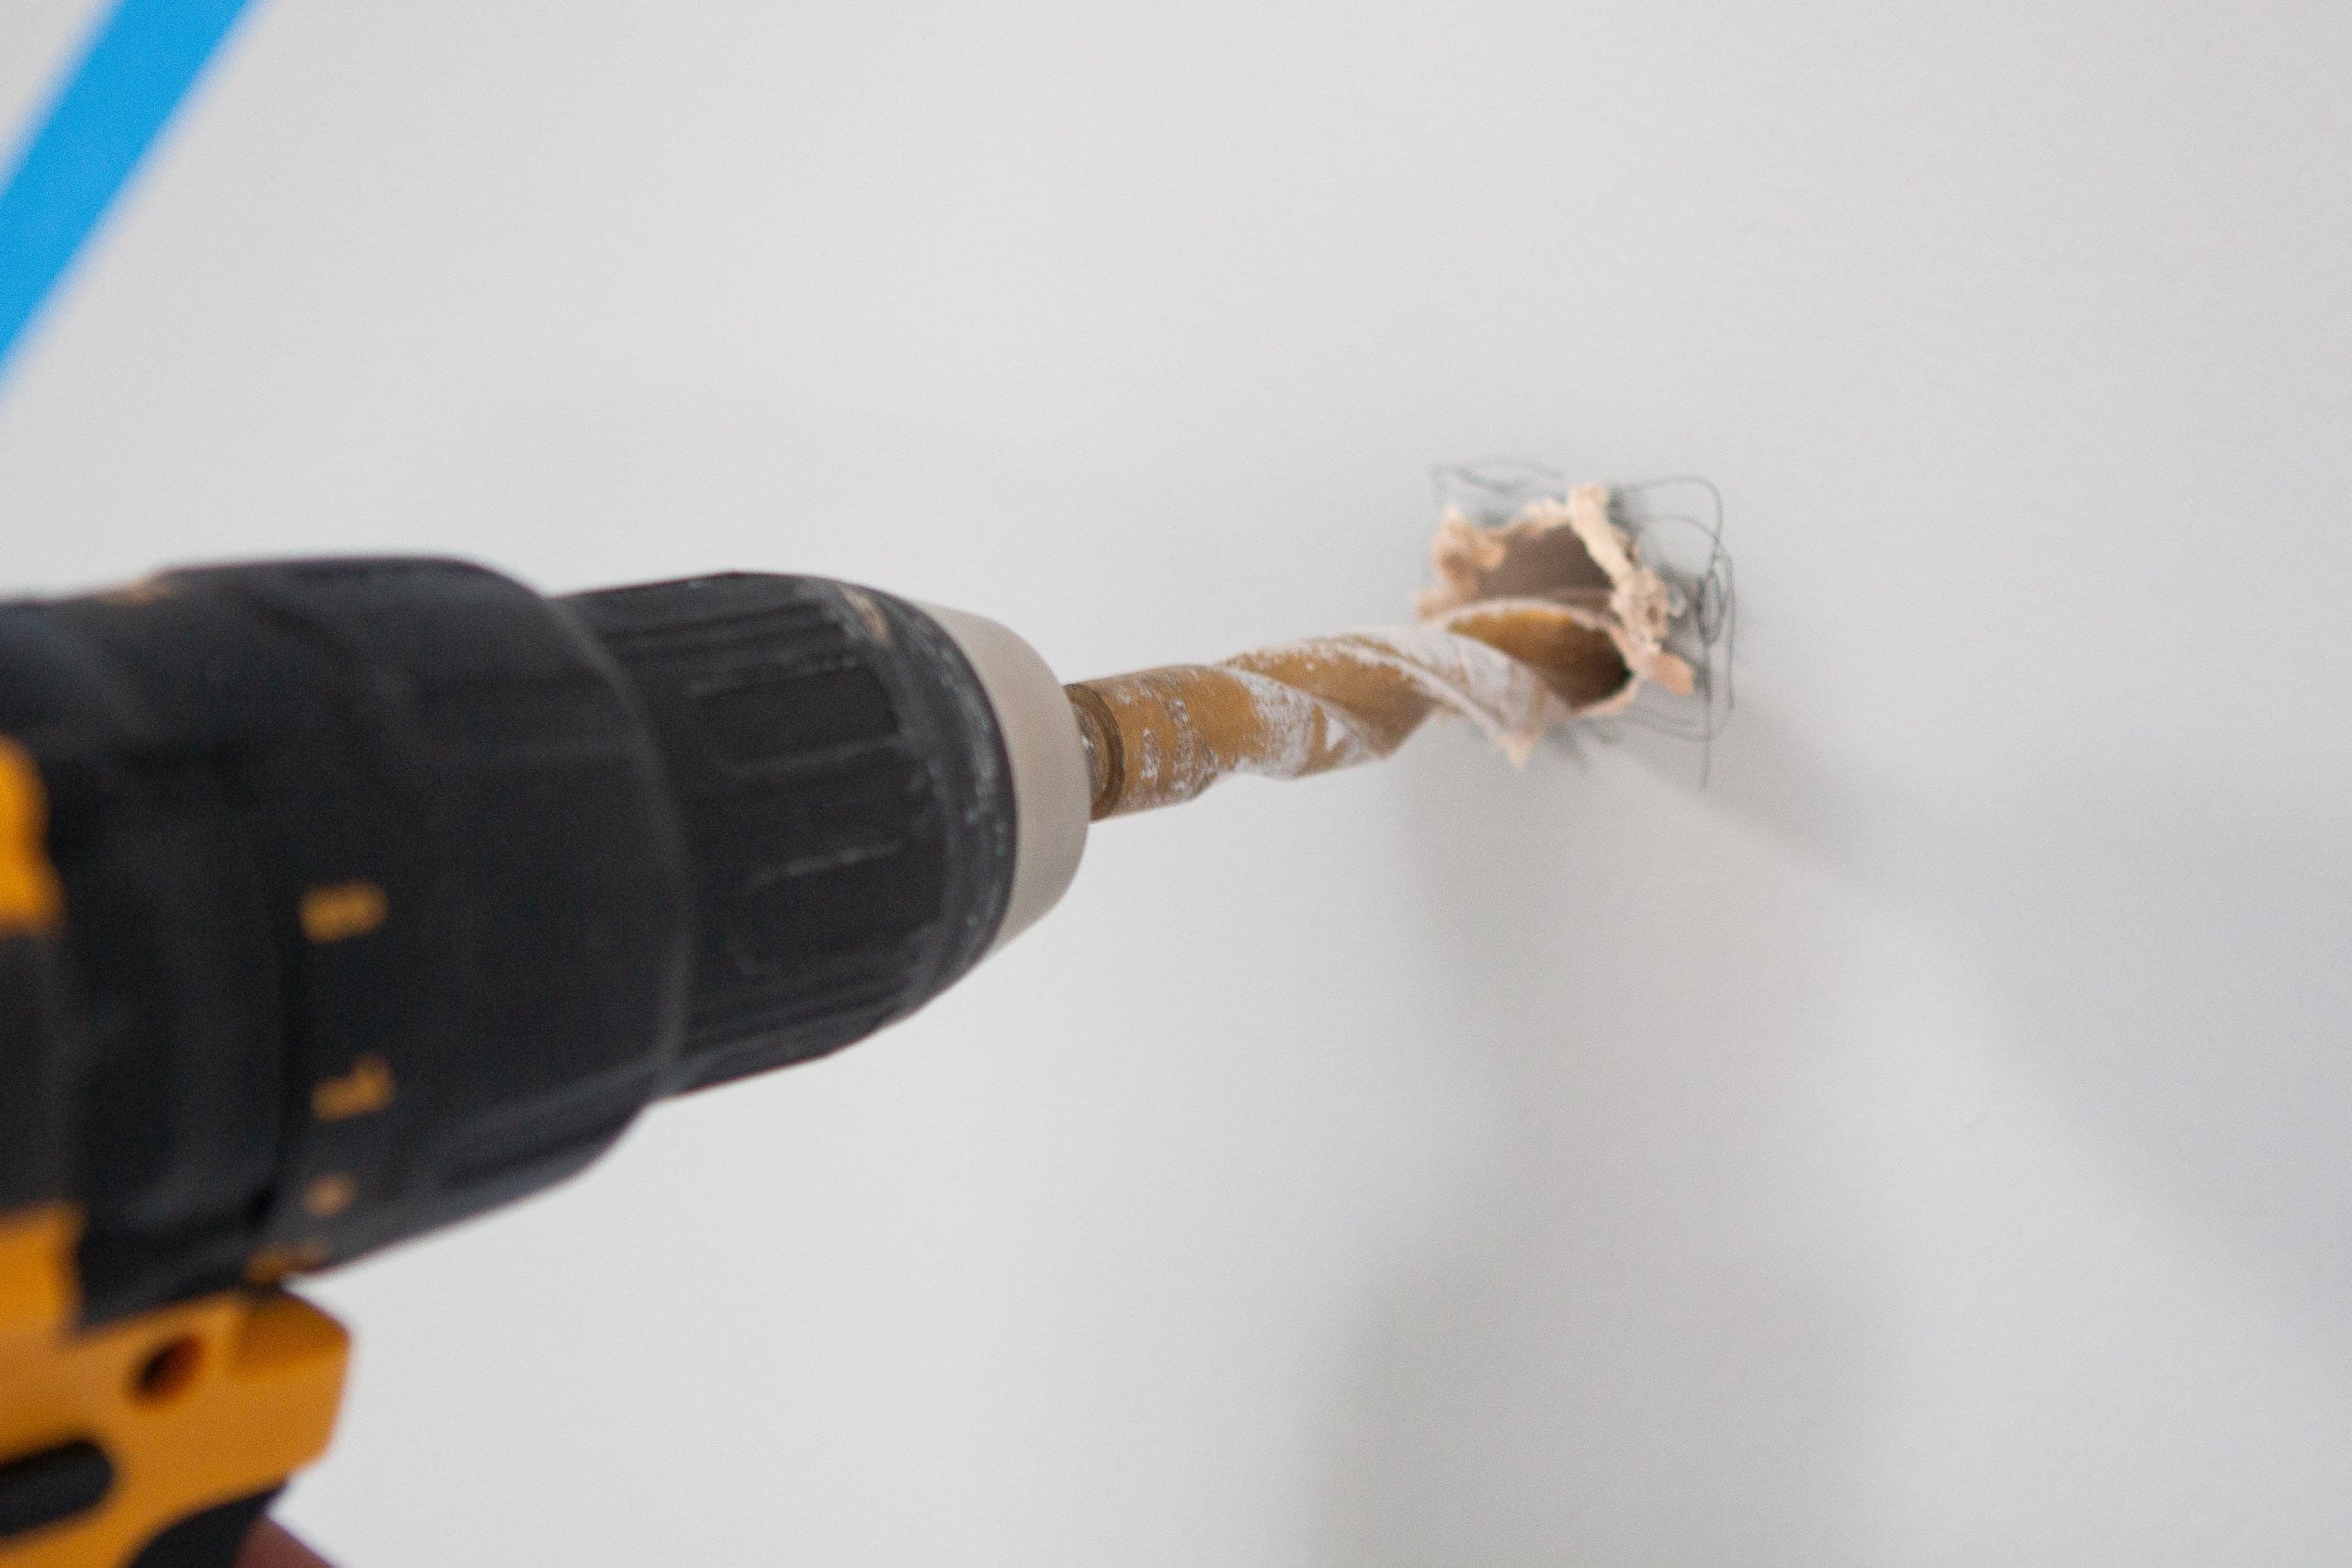 Drilling a hole into the wall